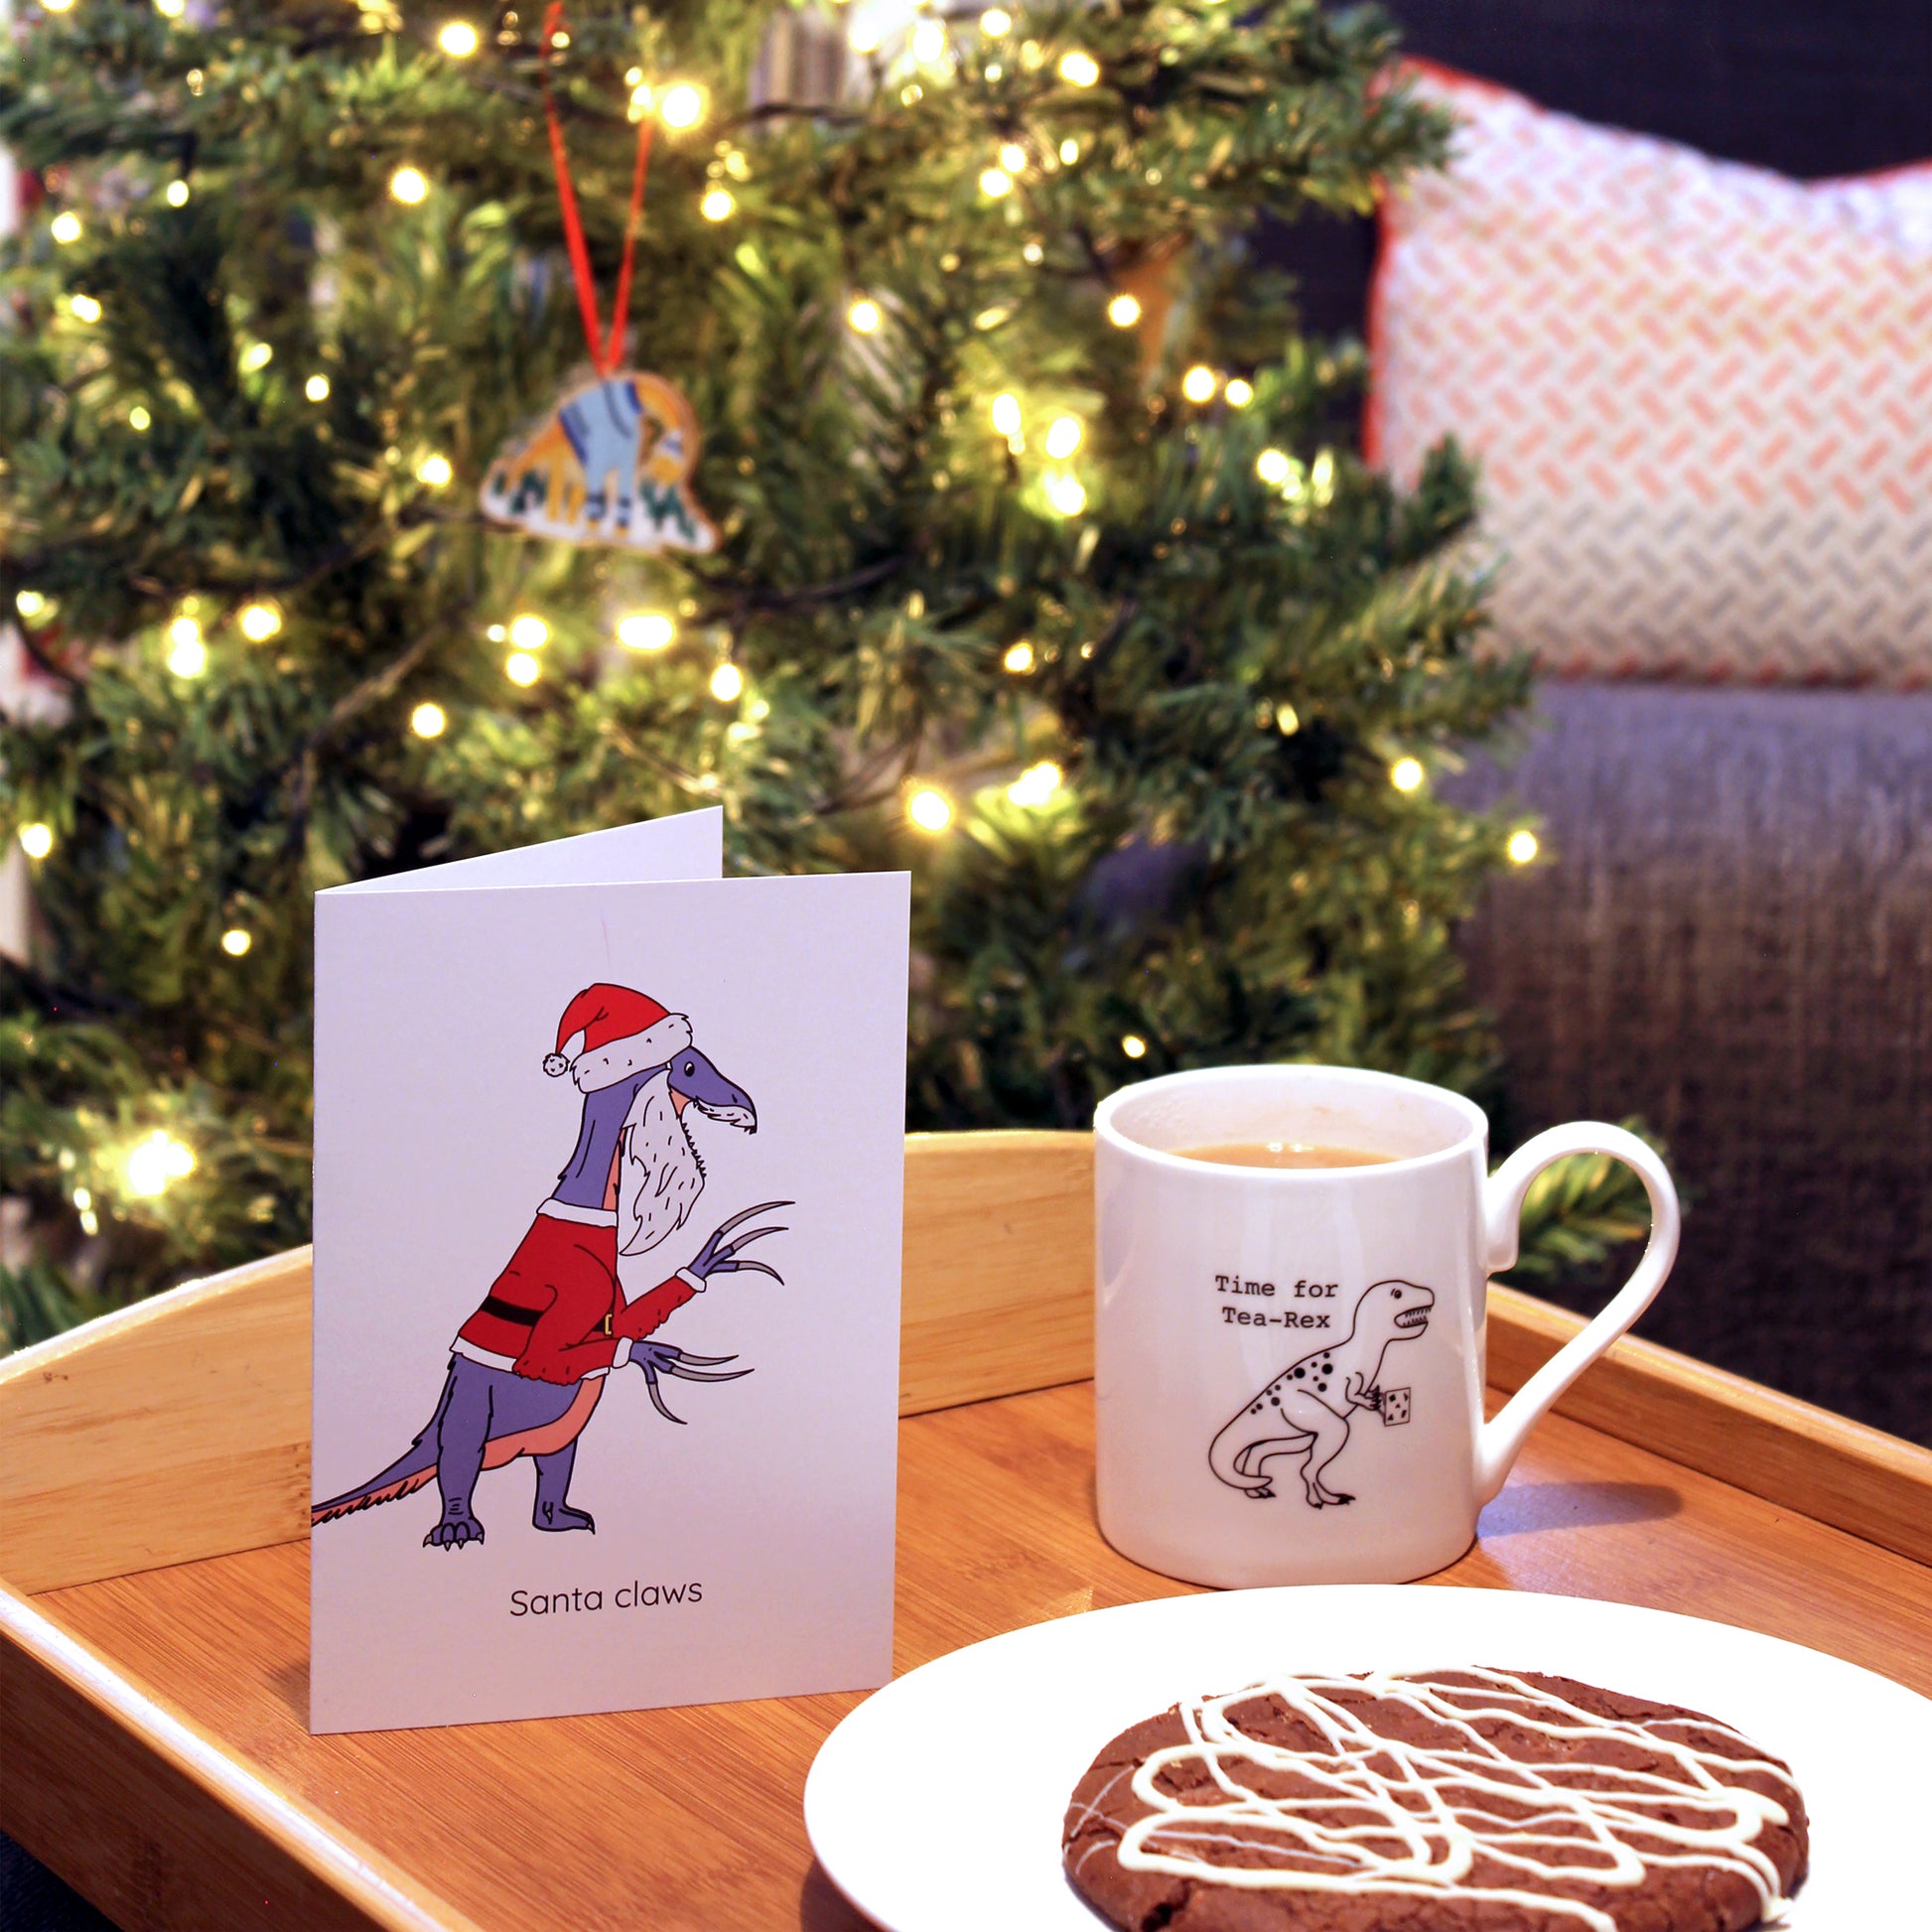 Santa claws greeting card on a tray with a cookie and a cup of tea, there is a Christmas tree in the background